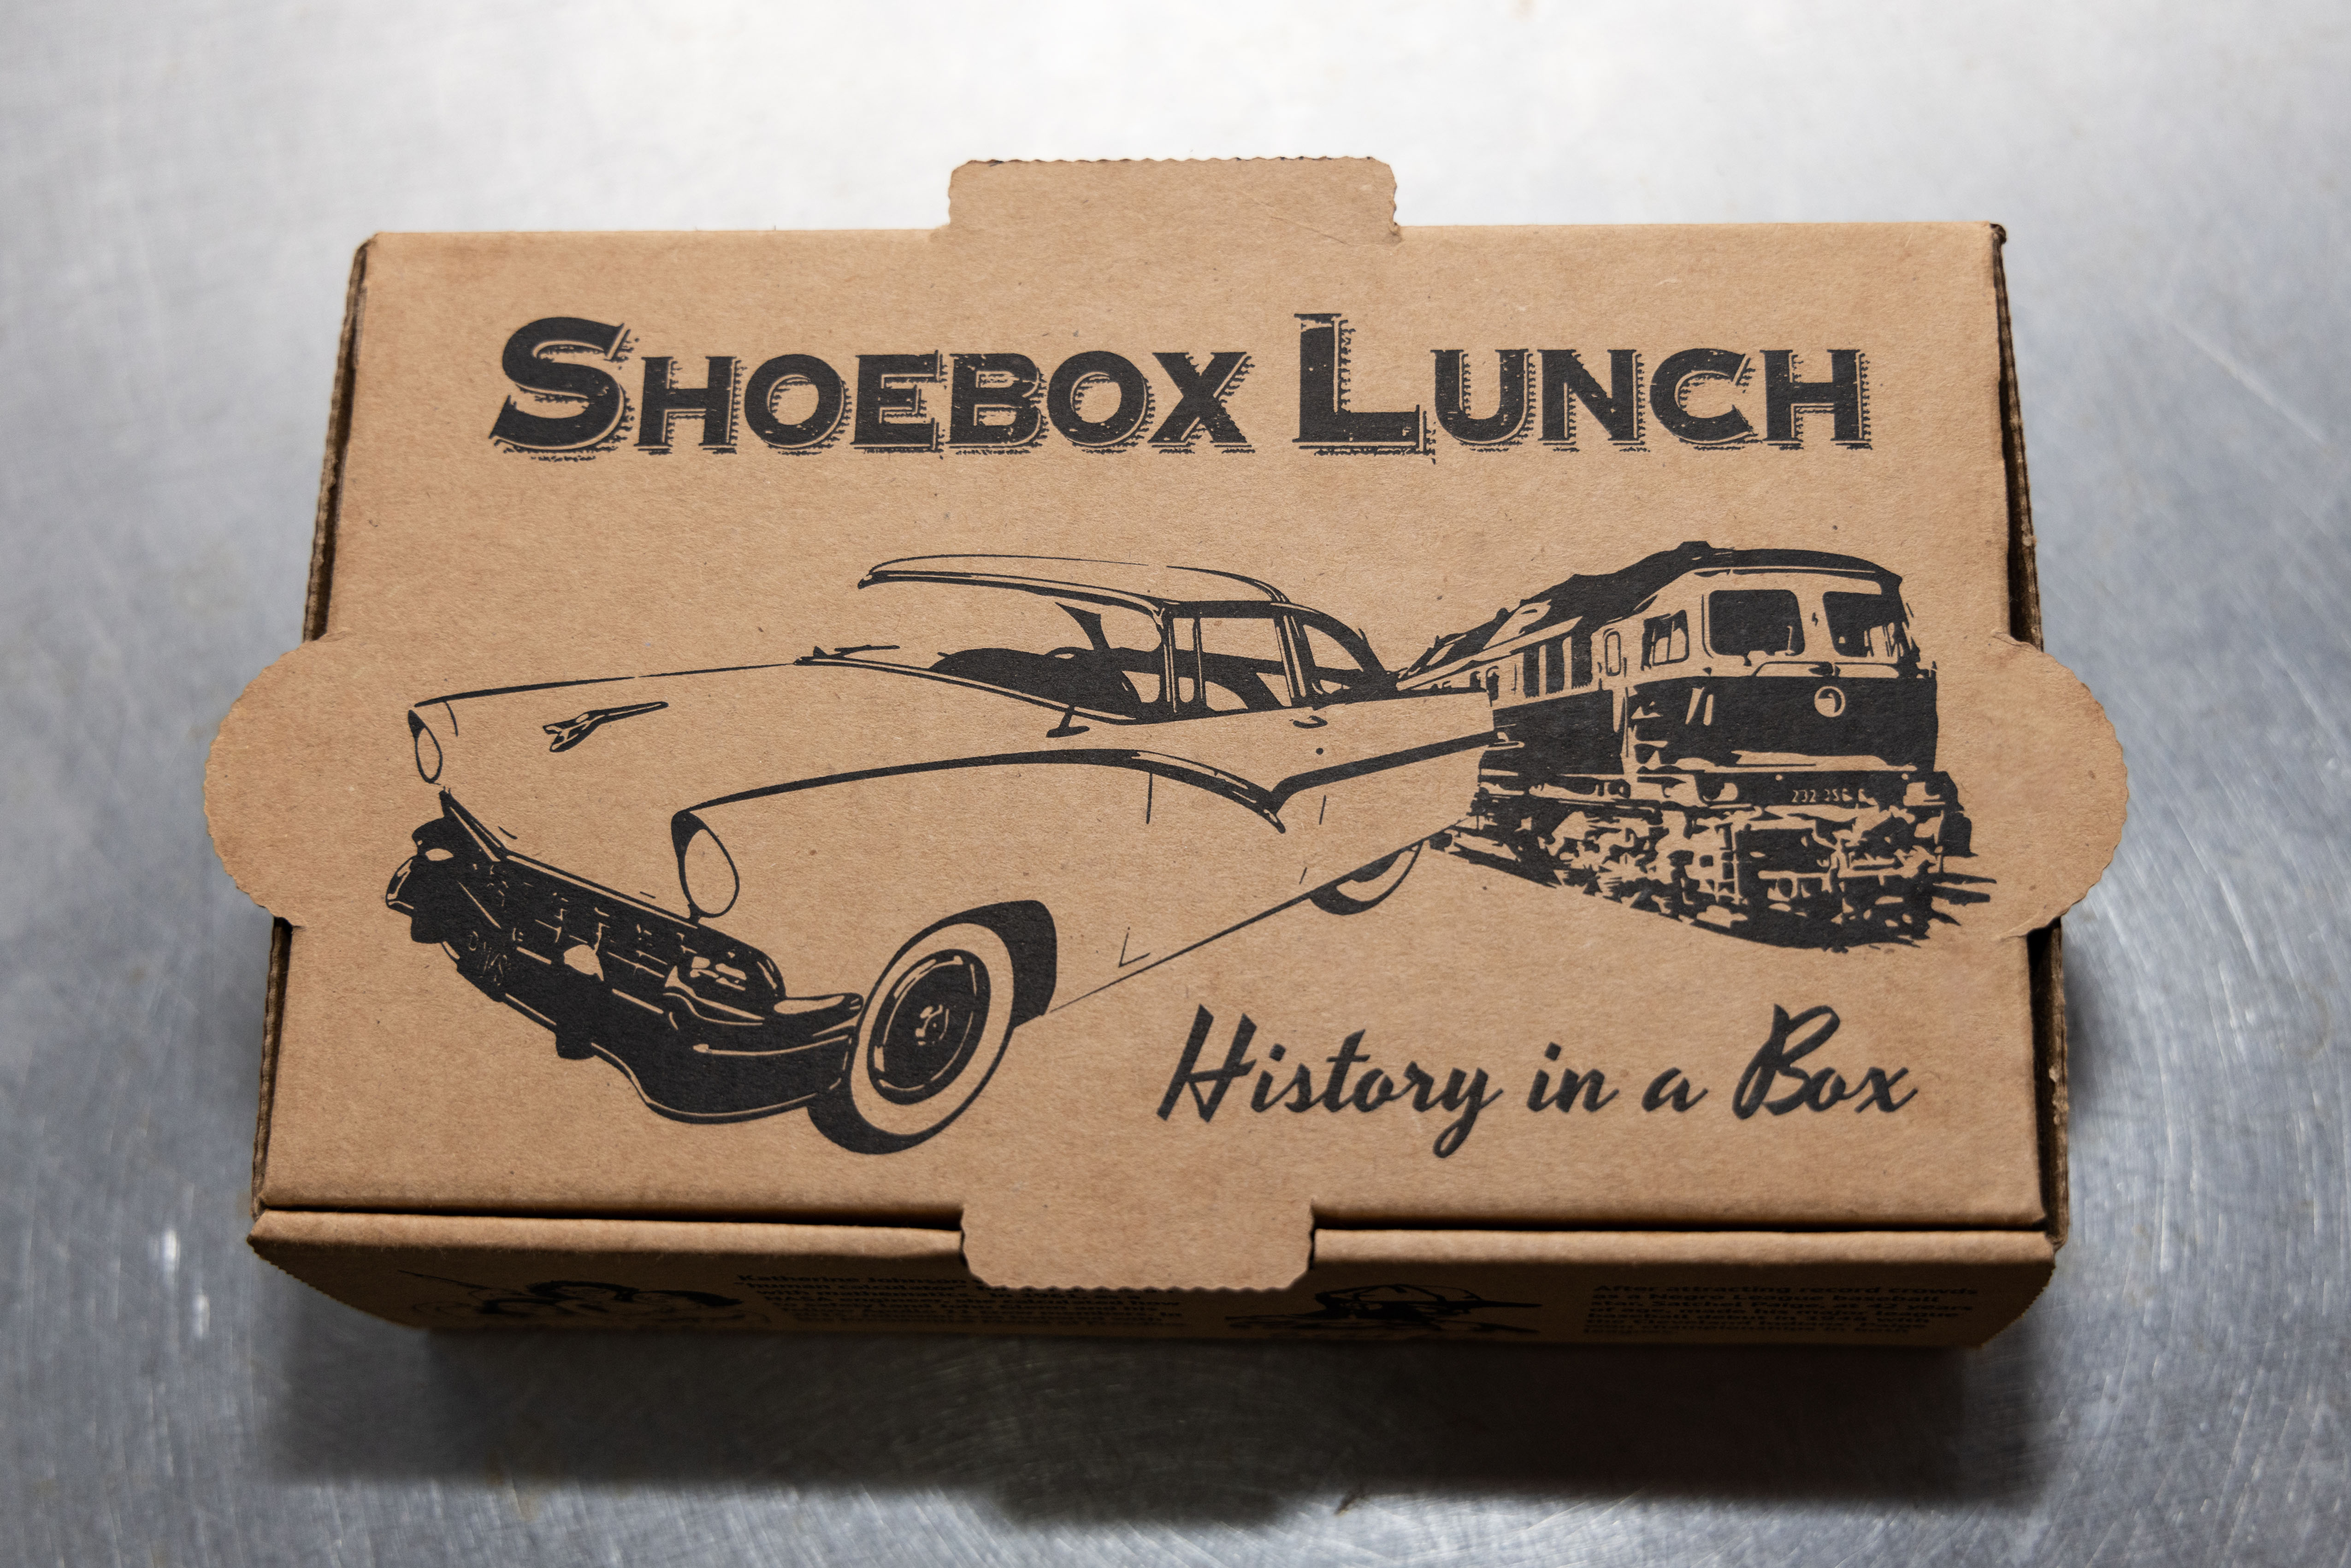 Old Country Store provided a "Shoebox Lunch" decorated with several Black History facts during the Lunch & Learn series held Friday, Feb. 4, 2022.